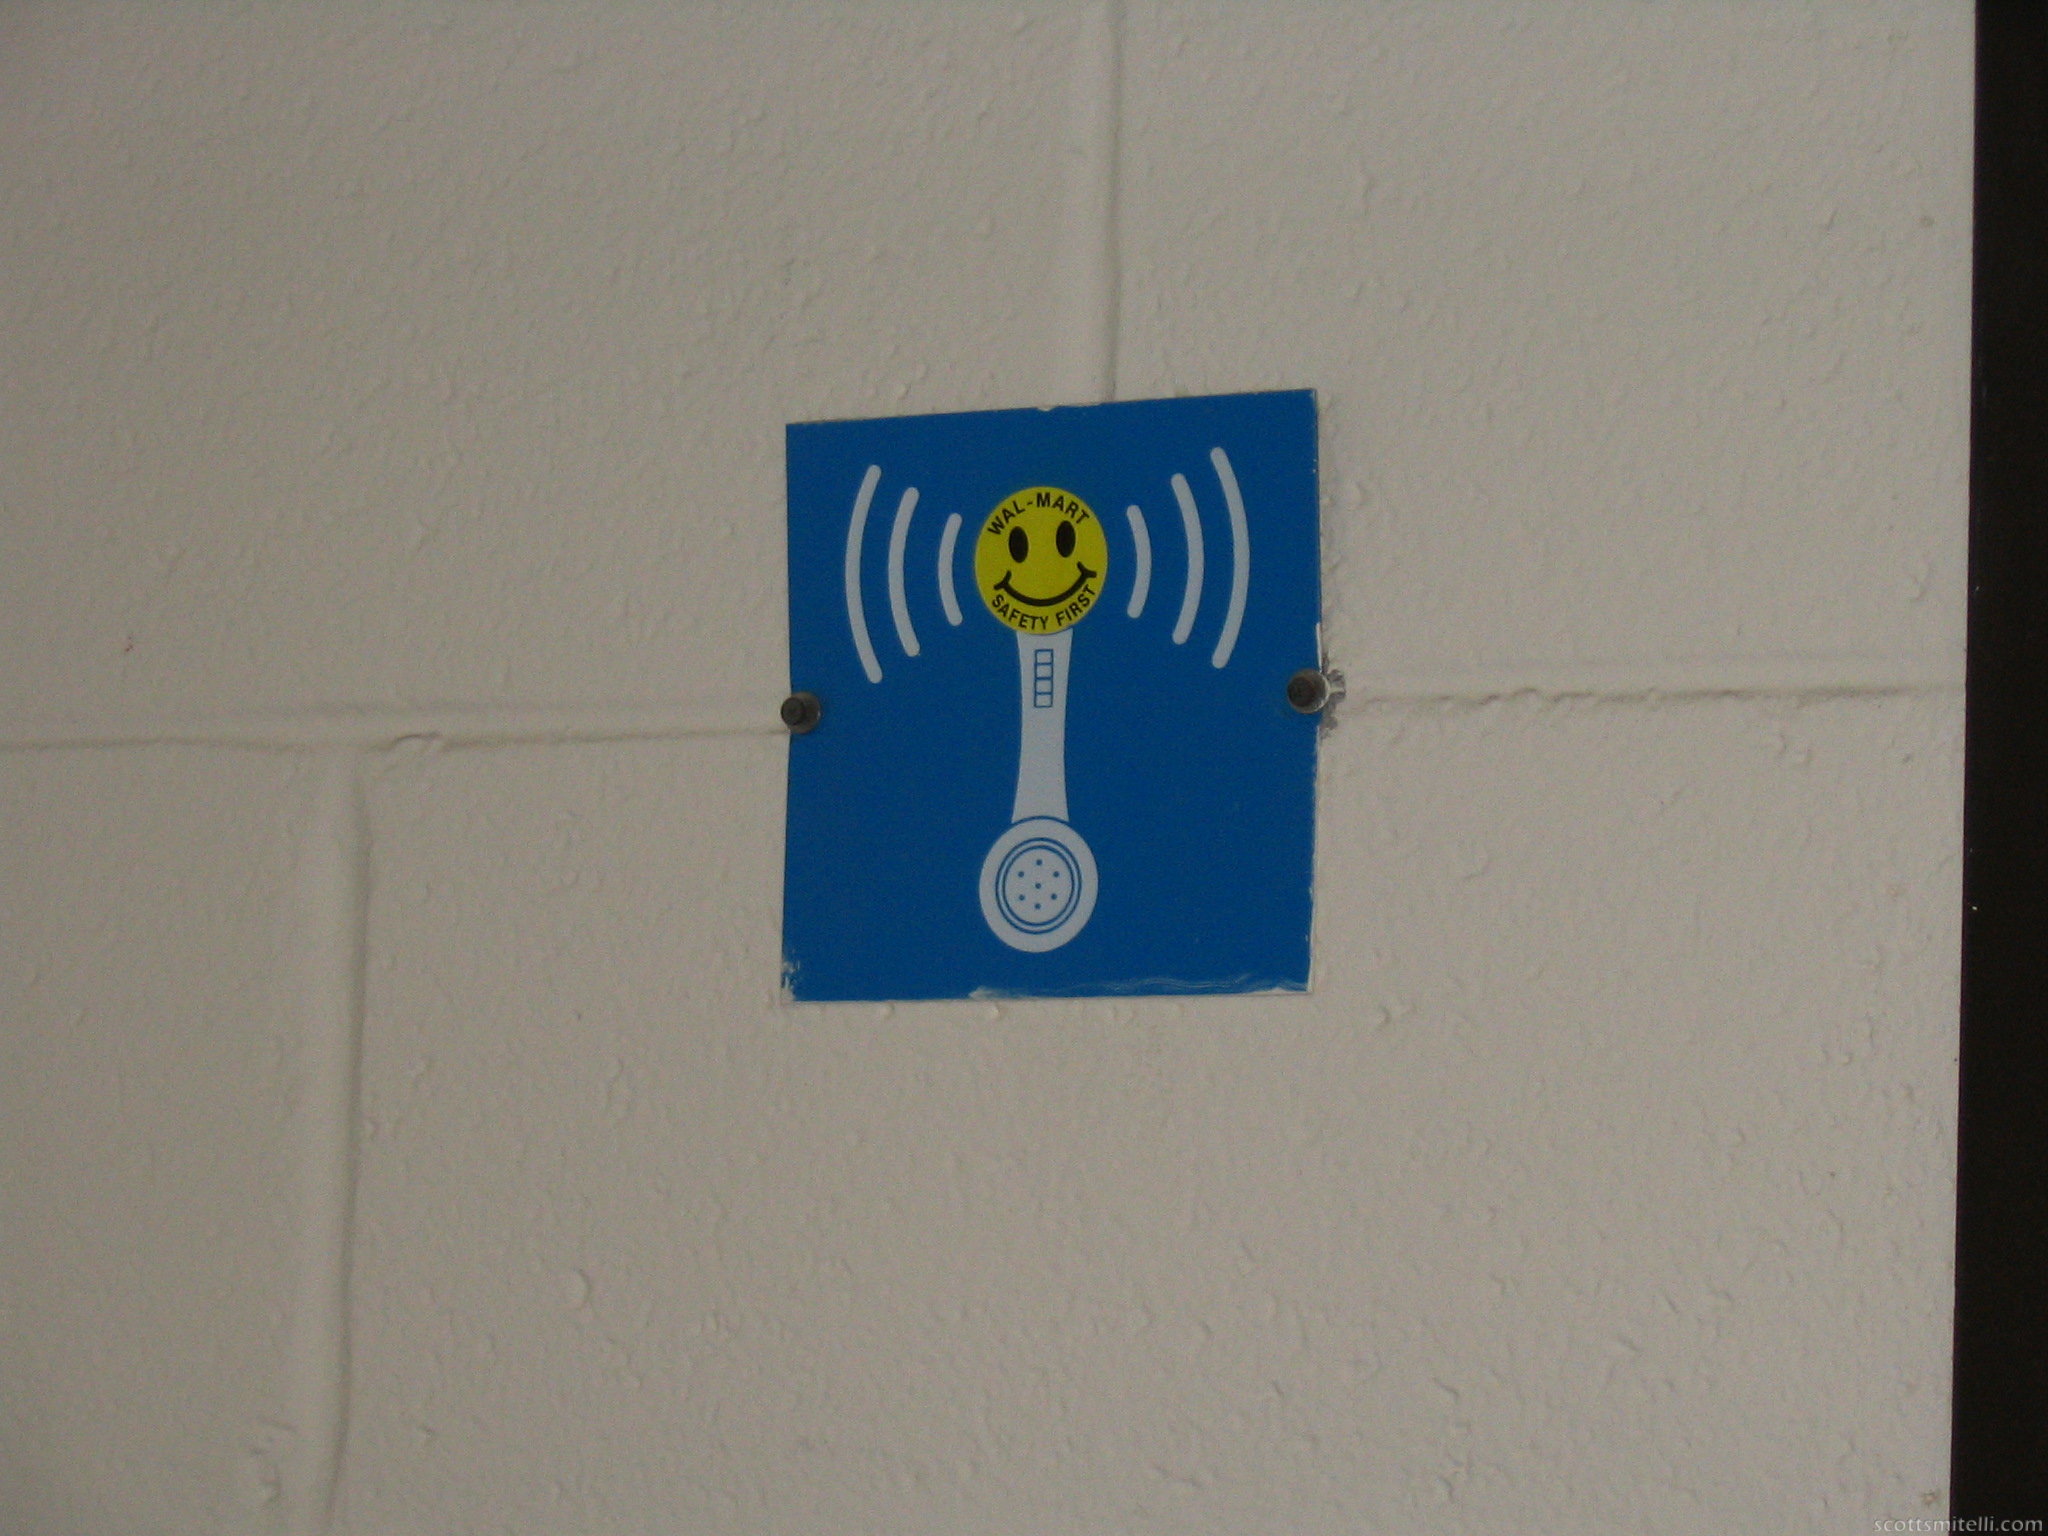 Wal-Mart Happy Safety Phone